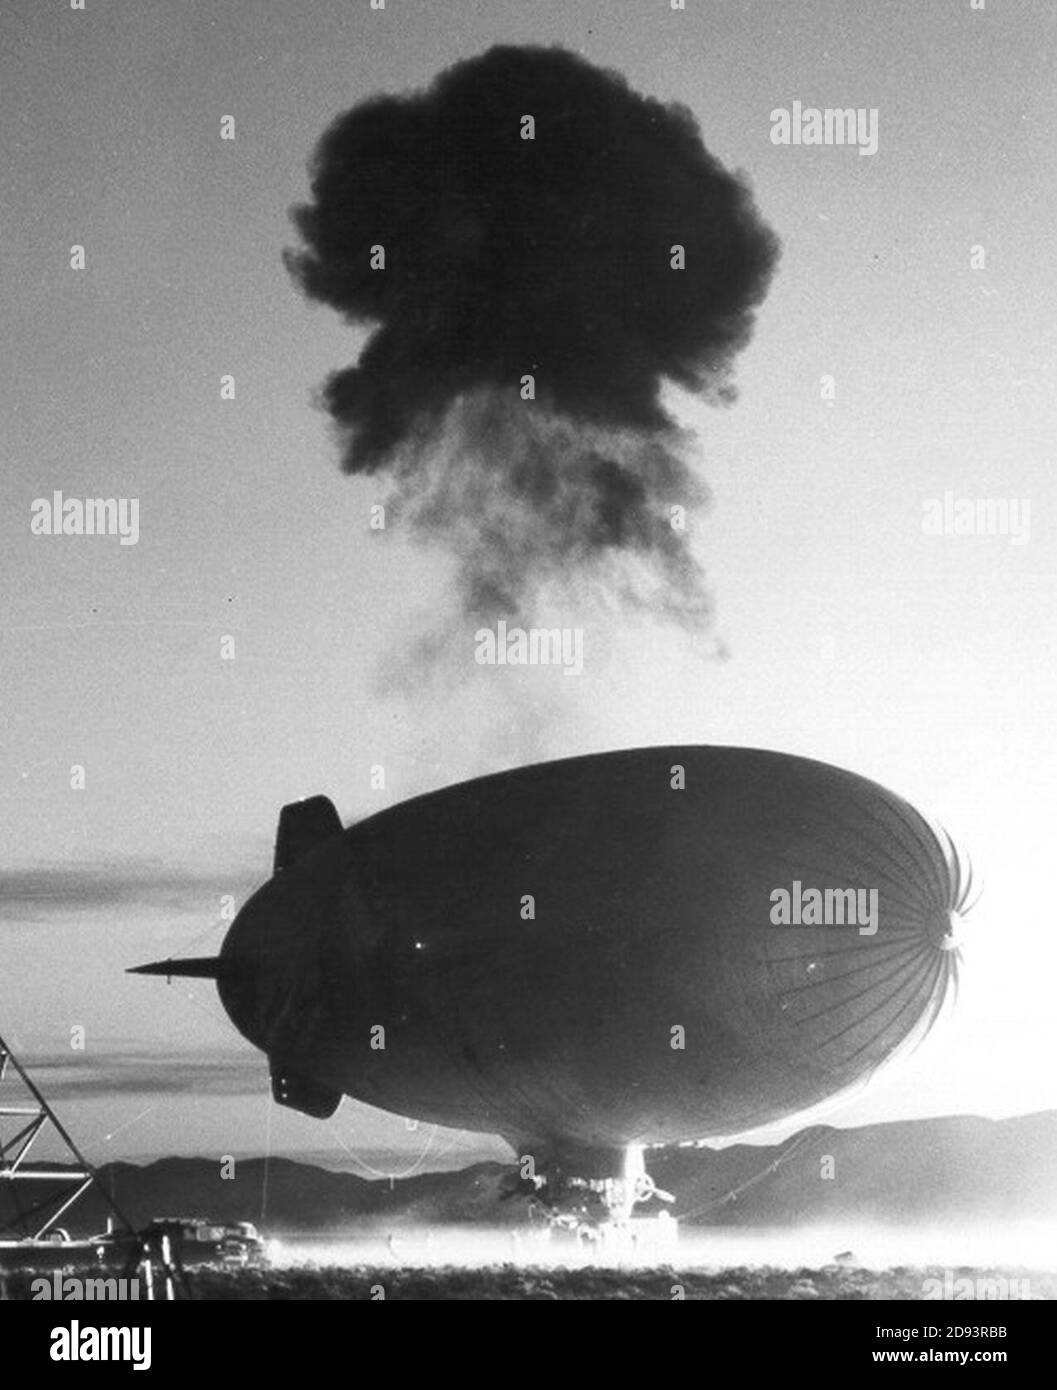 K-class blimp with nuclear explosion on 2 June 1957, from- Operation Plumbbob - Franklin (cropped). Stock Photo